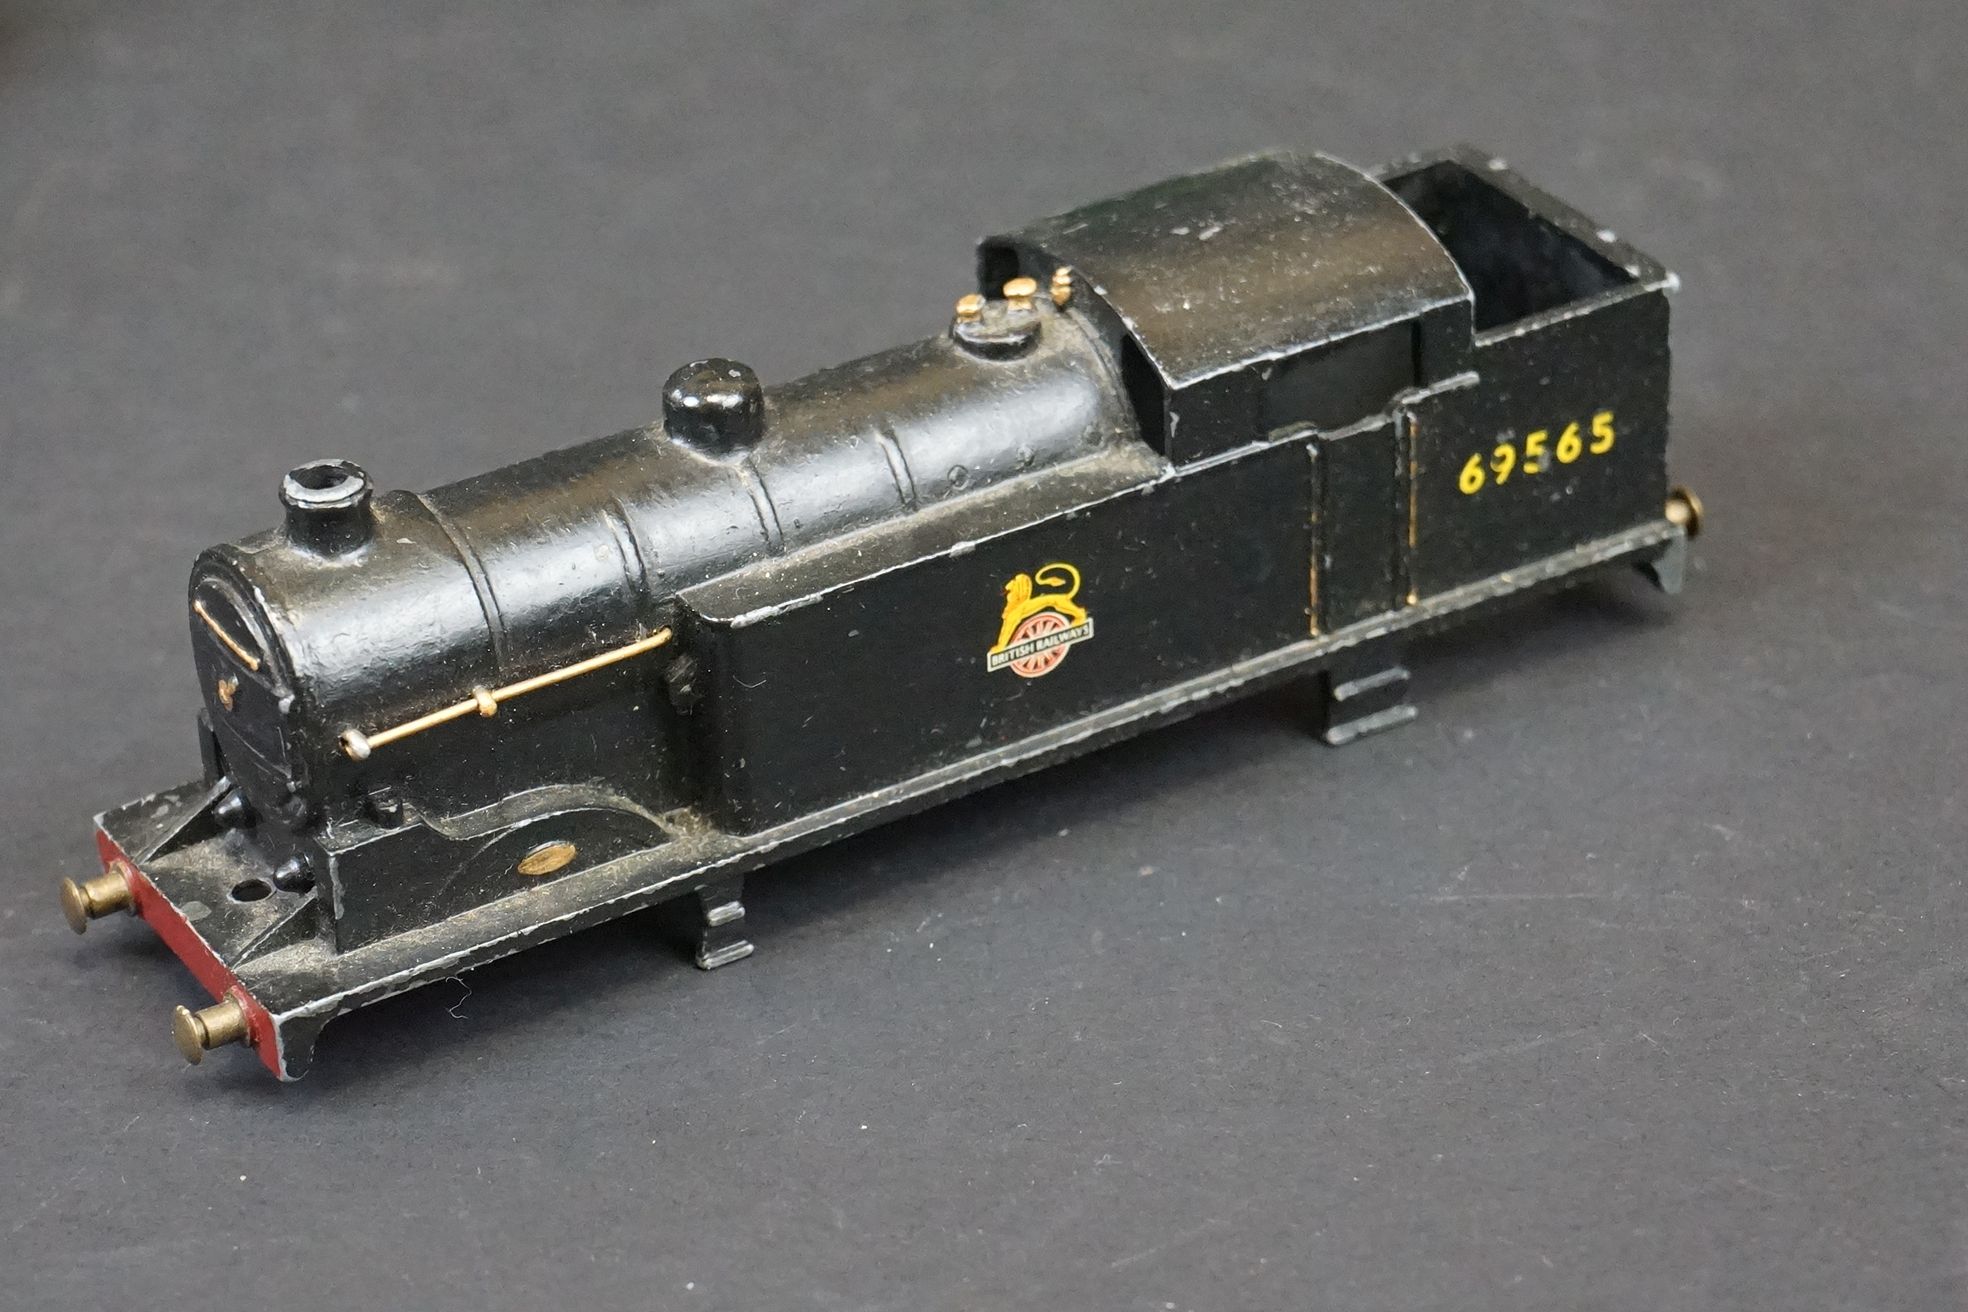 Three Hornby Dublo locomotives to include Duchess of Montrose and Duchess of Sutherland, plus 4 x - Image 9 of 11